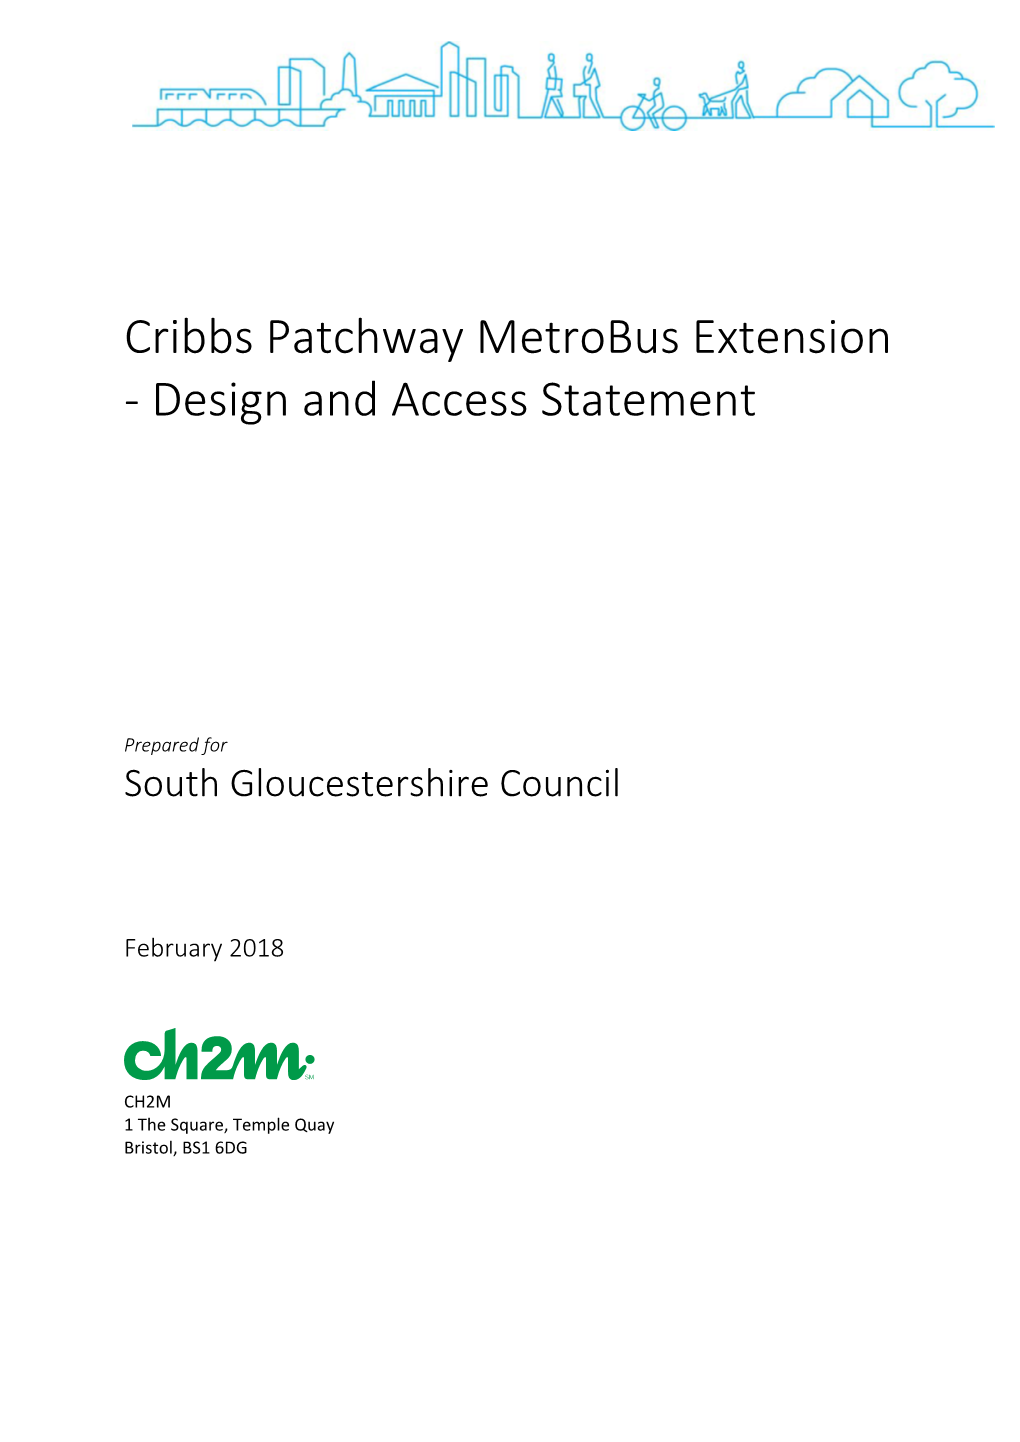 Cribbs Patchway Metrobus Extension ‐ Design and Access Statement